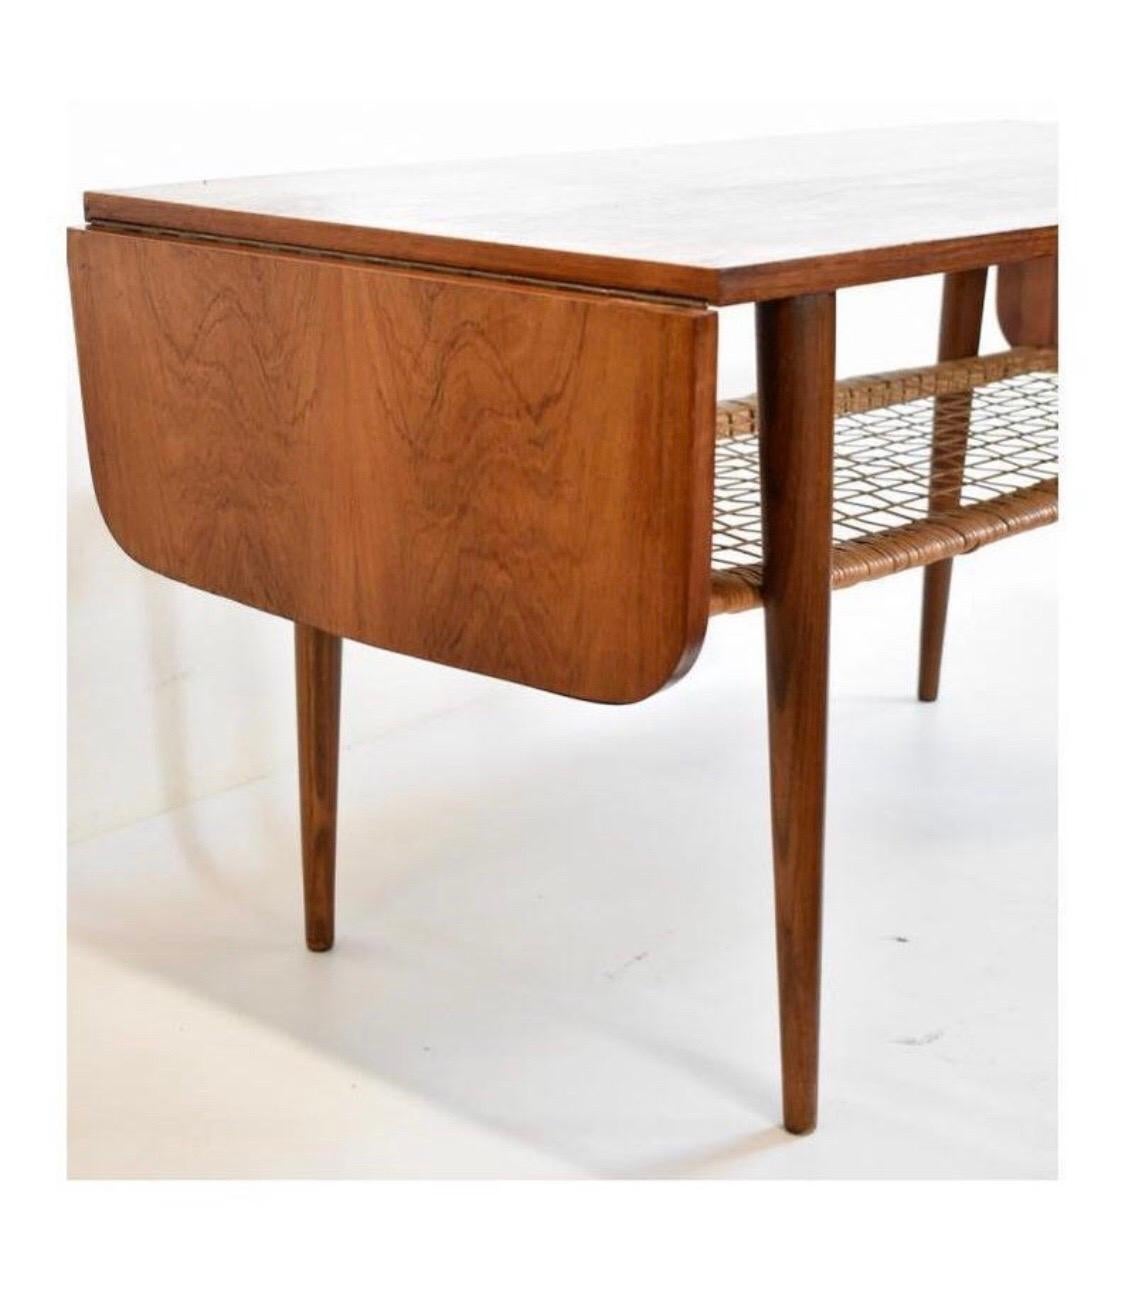 Late 20th Century 1960s Danish Rosewood Mid-Century Modern Double Leaf Coffee Table For Sale